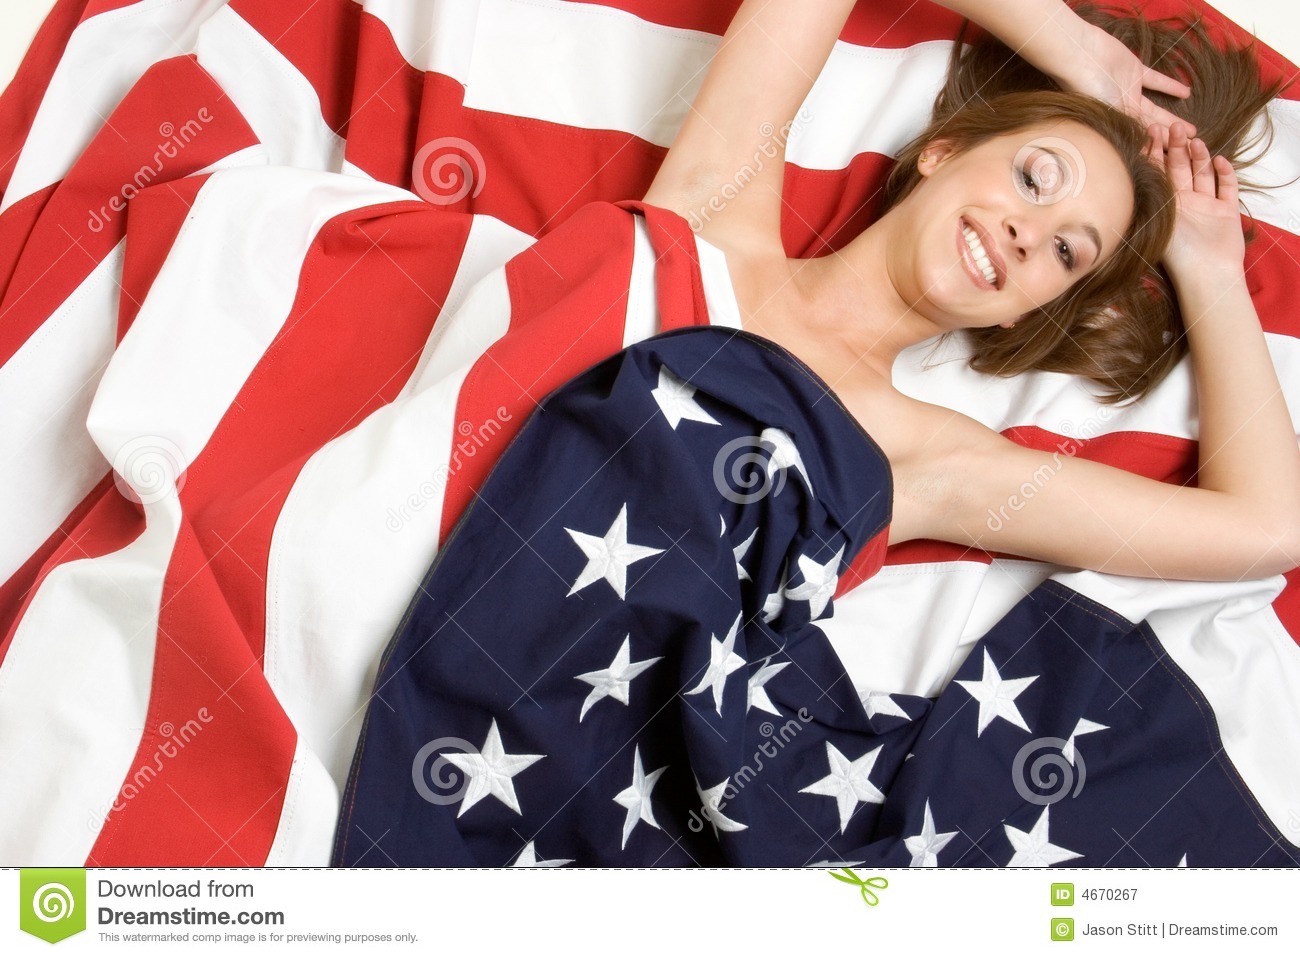 Patriotic Person Royalty Free Stock Photography   Image  4670267